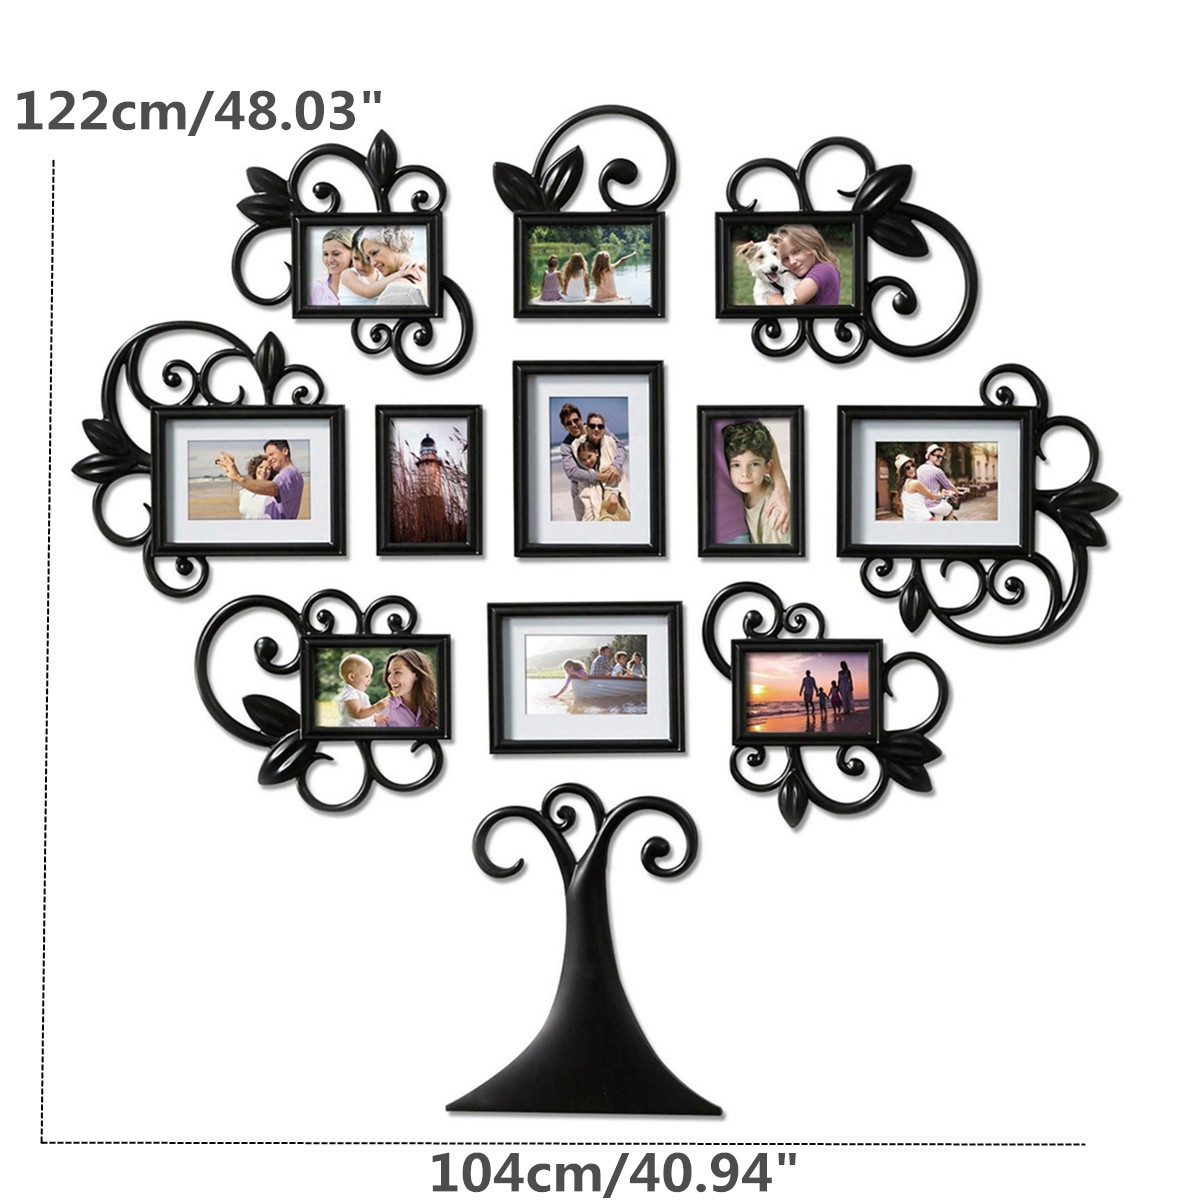 3D-Family-Tree-Photo-Picture-Frame-Collage-Wall-Stickers-Art-Home-Decor-1725864-2